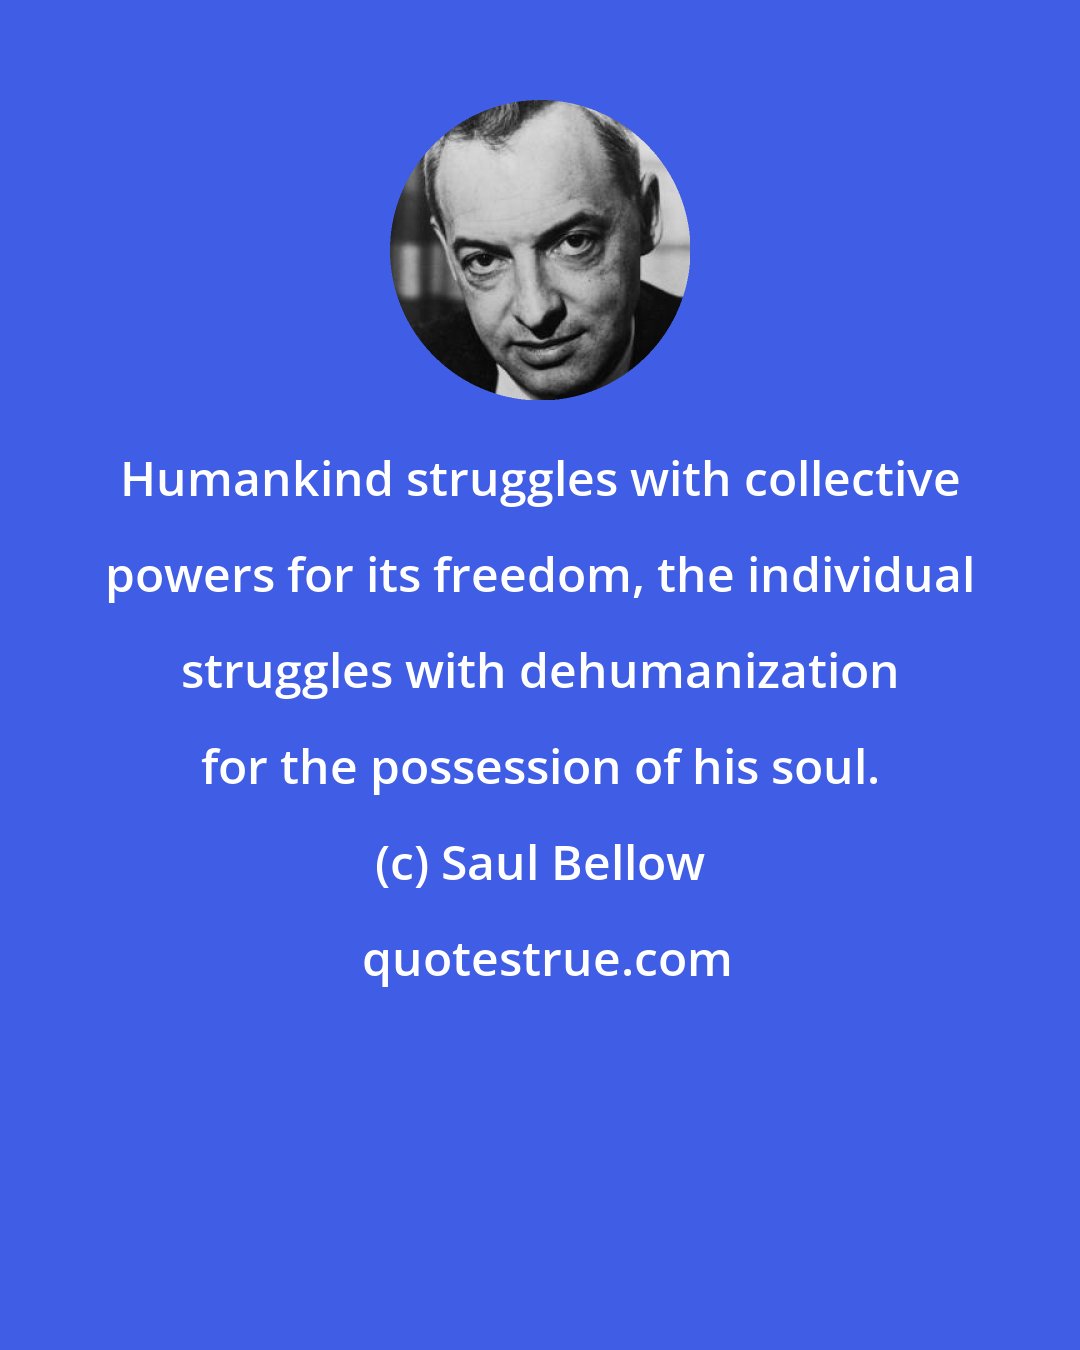 Saul Bellow: Humankind struggles with collective powers for its freedom, the individual struggles with dehumanization for the possession of his soul.